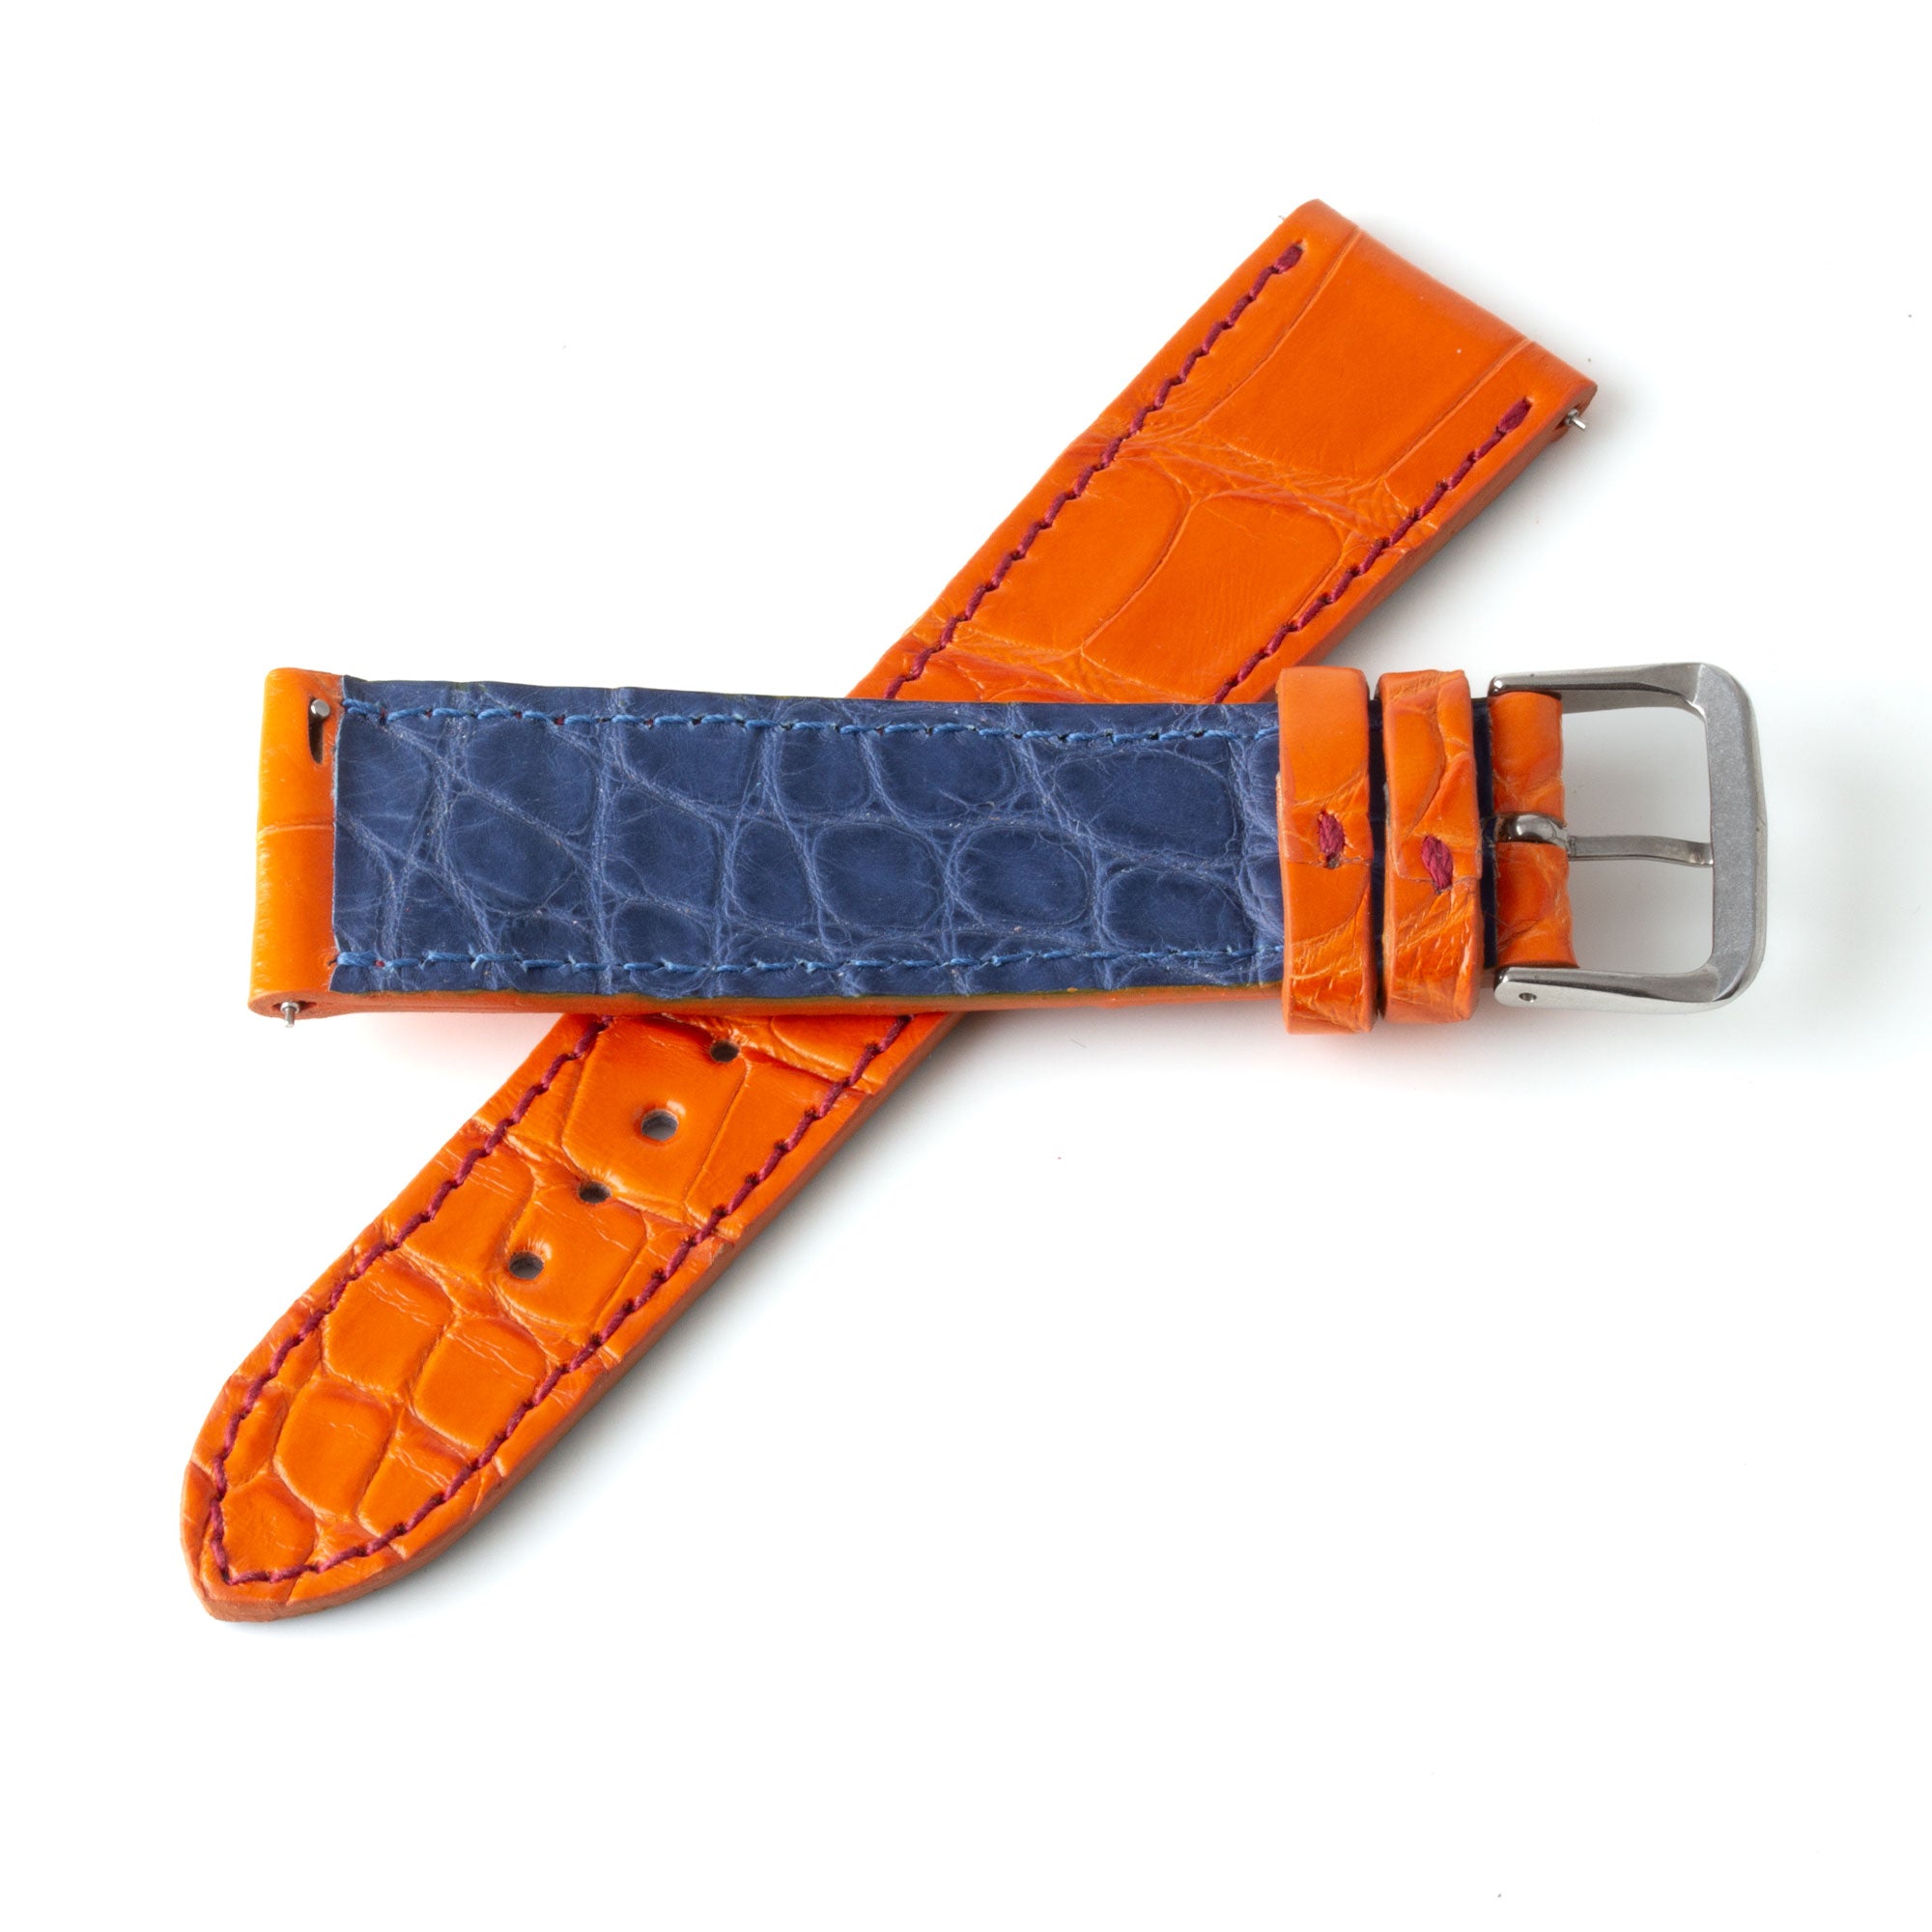 Alligator "Solo" leather watch band - 22mm width (0.87 inches) / Size M (n° 8)